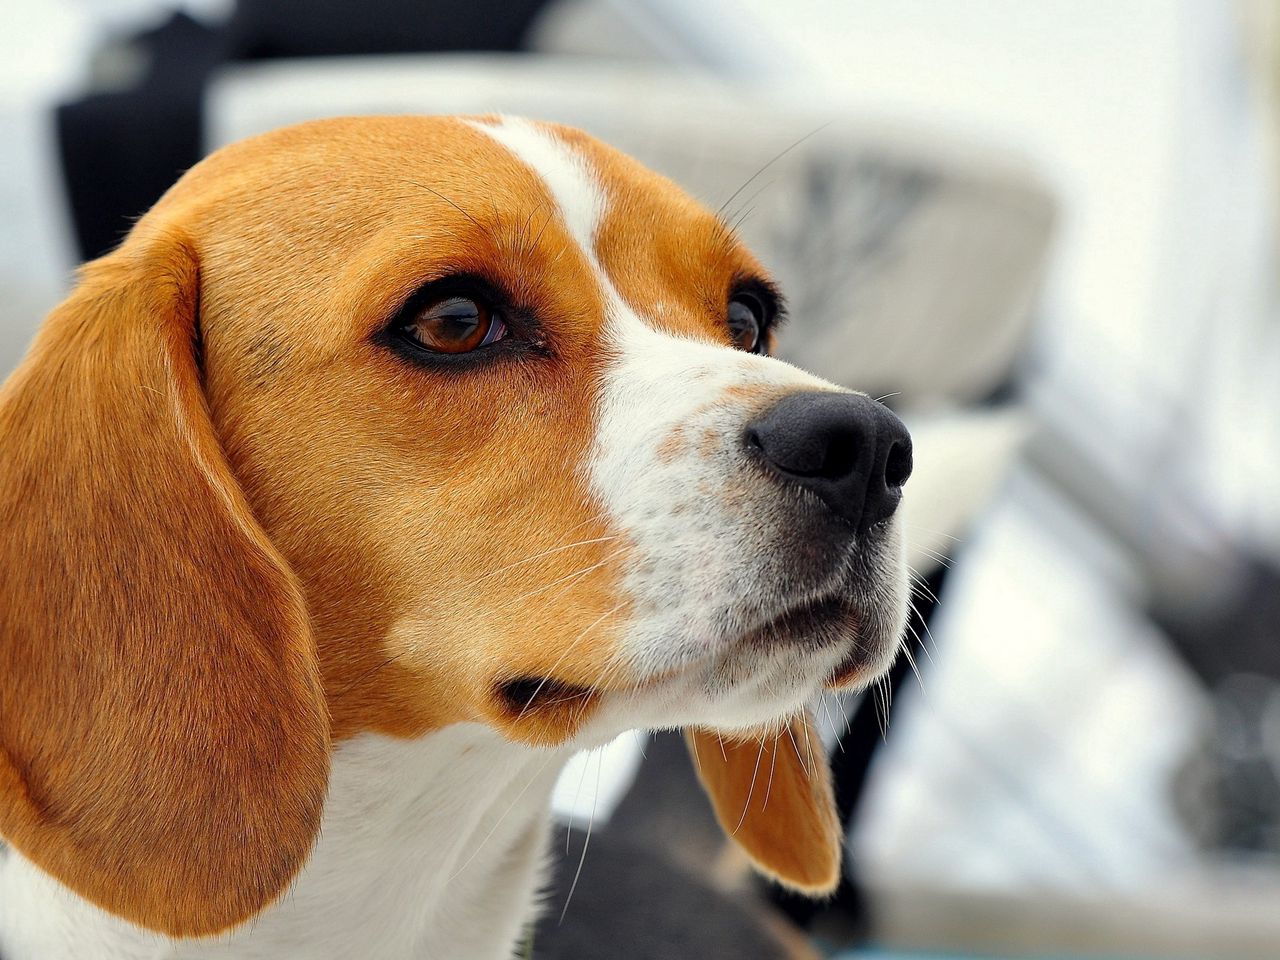 Download wallpapers beagle puppy pets cute animals dogs beagles for  desktop with resolution 1920x1200 High Quality HD pictures wallpapers